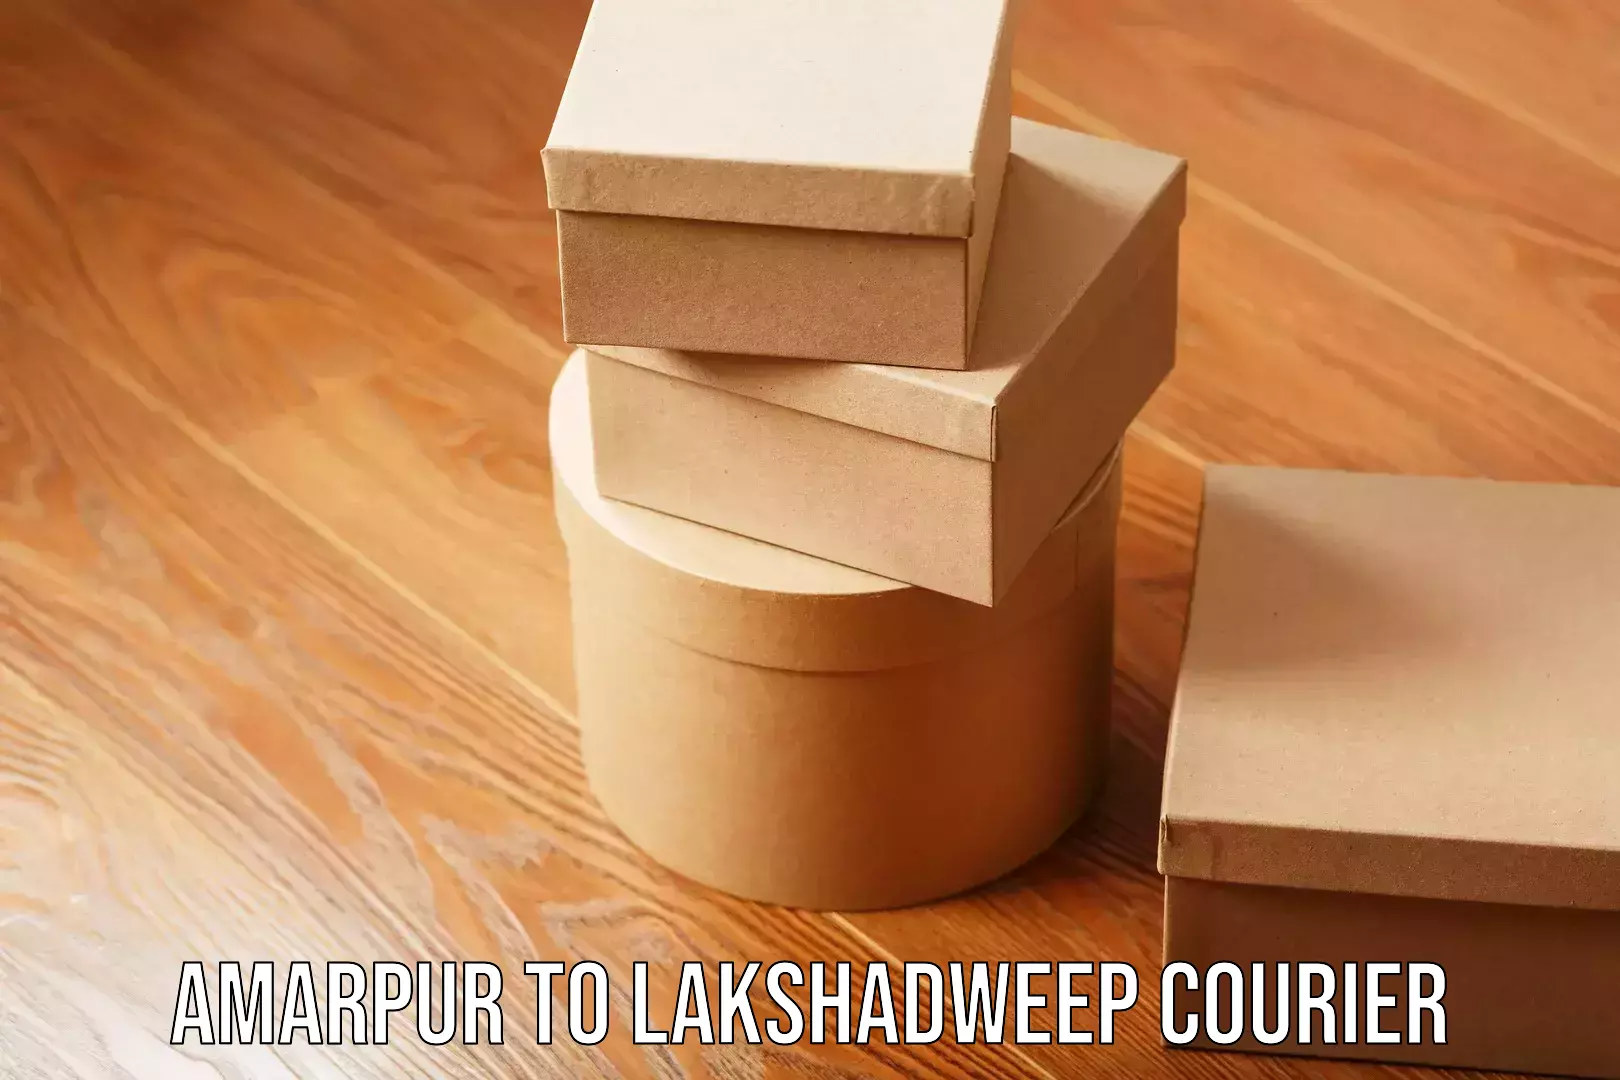 Overnight delivery services Amarpur to Lakshadweep